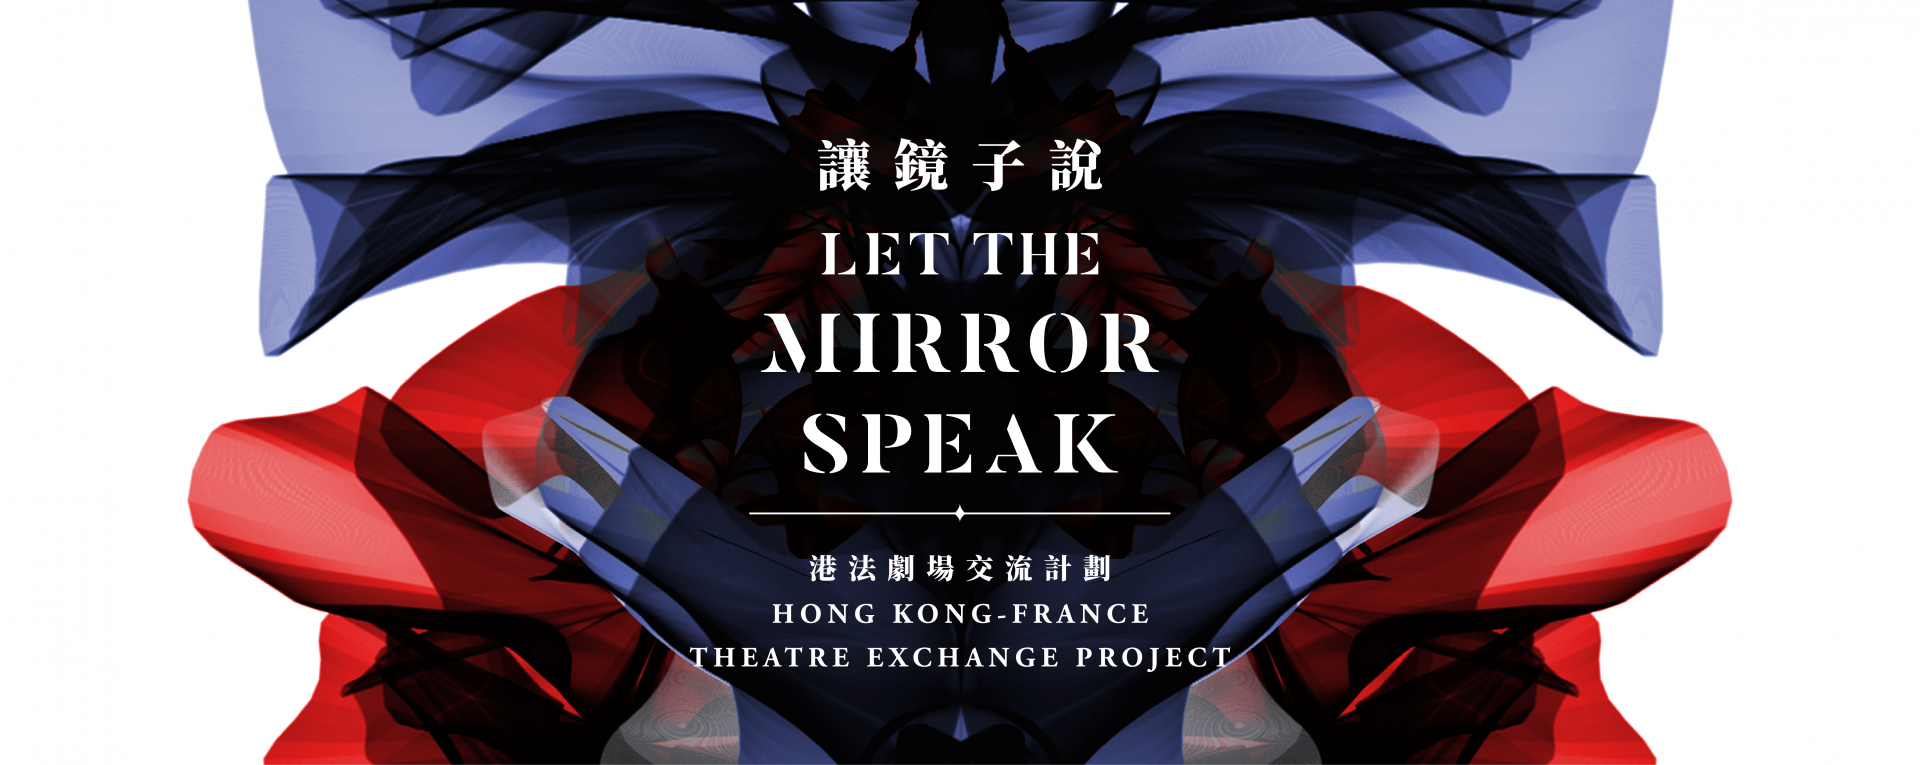 Let the Mirror Speak Hong Kong-France Theatre Exchange Project